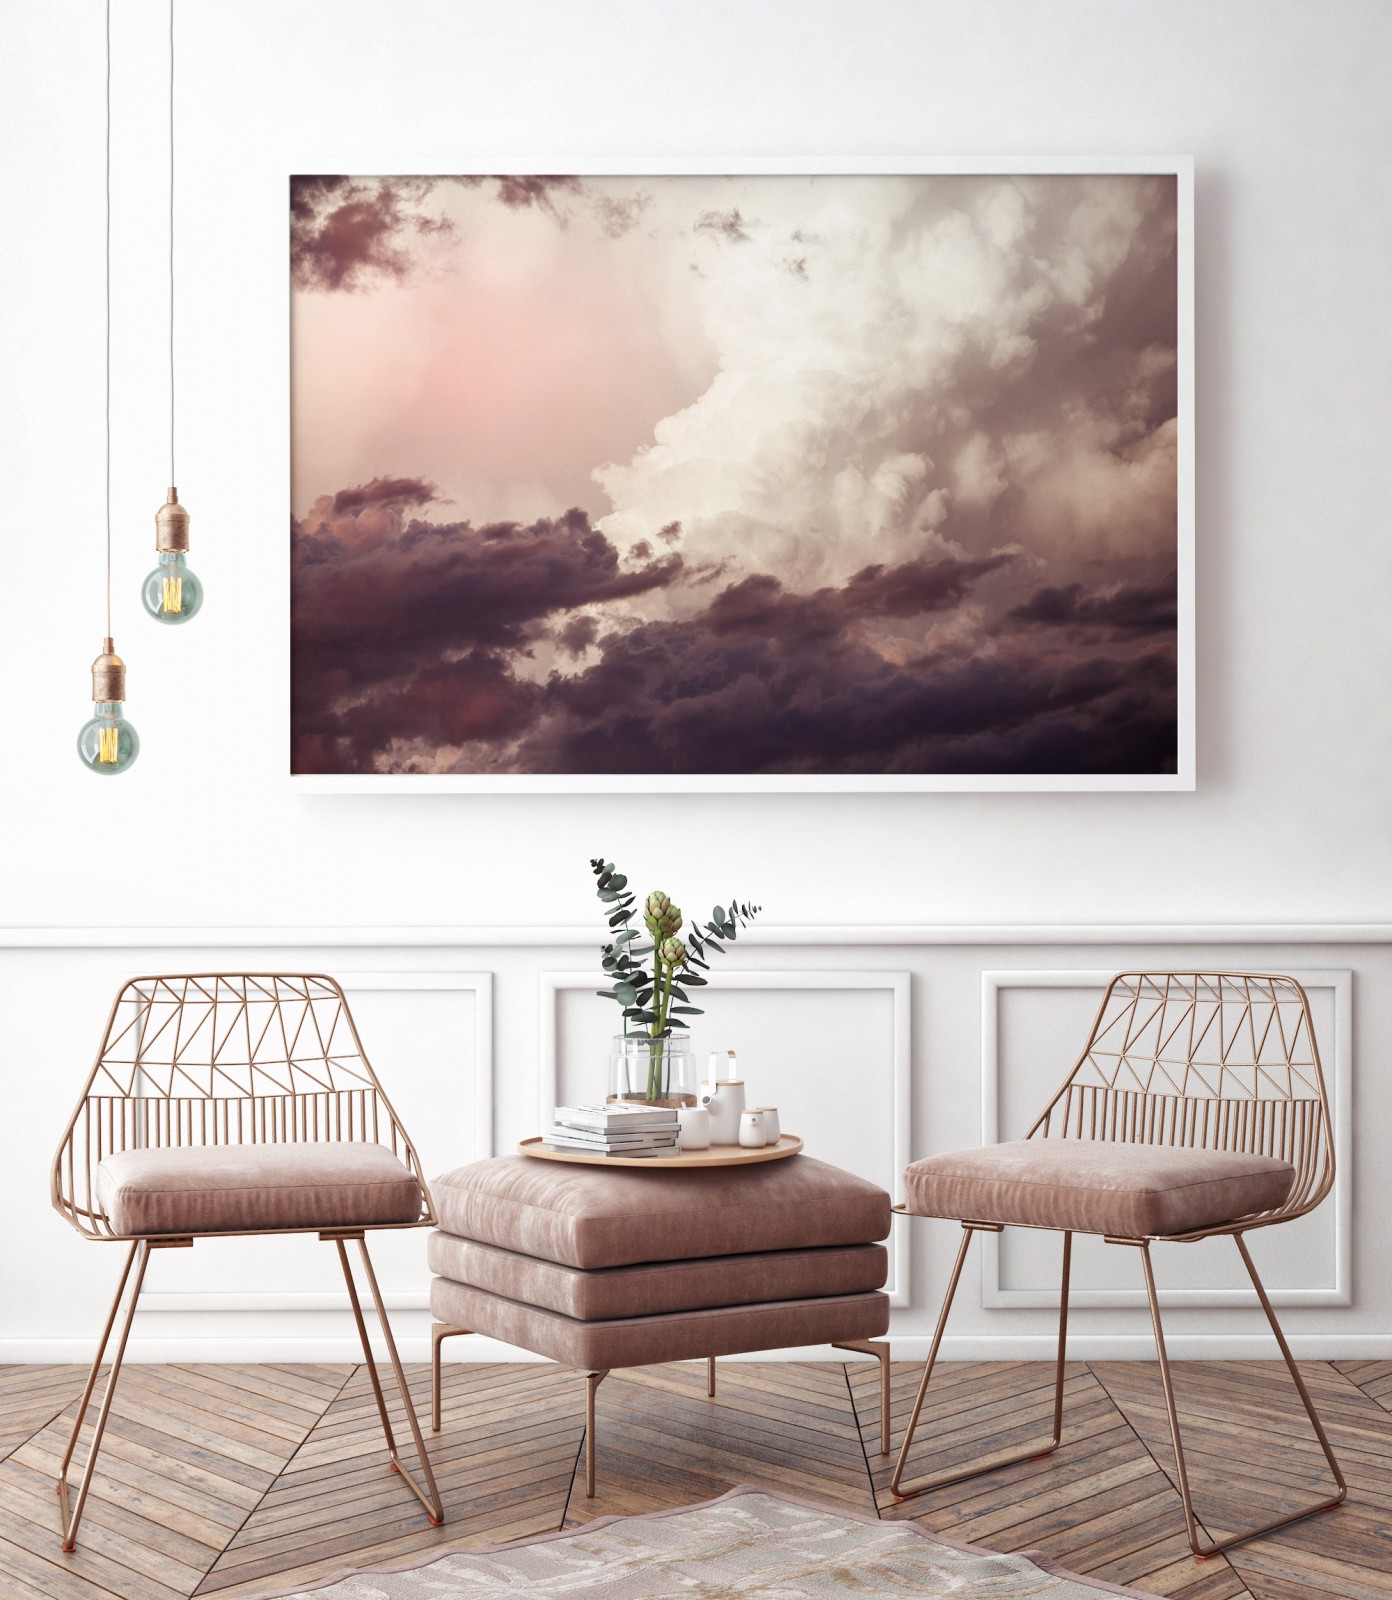 The artwork that fits every home is with